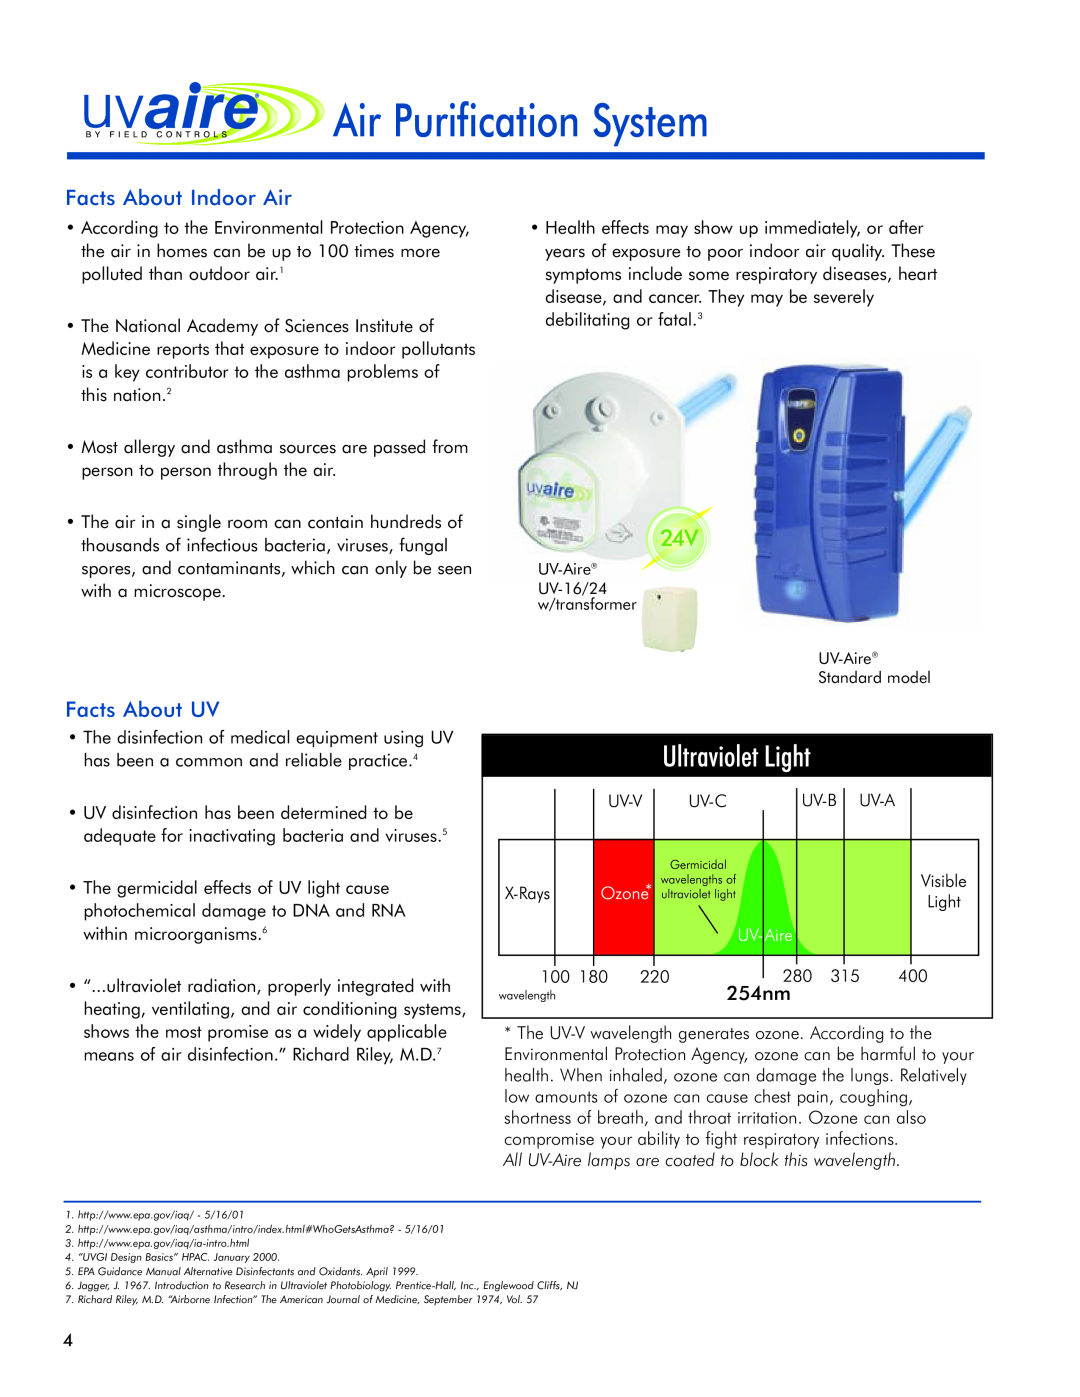 Field Controls 24v manual Facts About Indoor Air, Facts About UV, UV-AIRE Air Purification System 